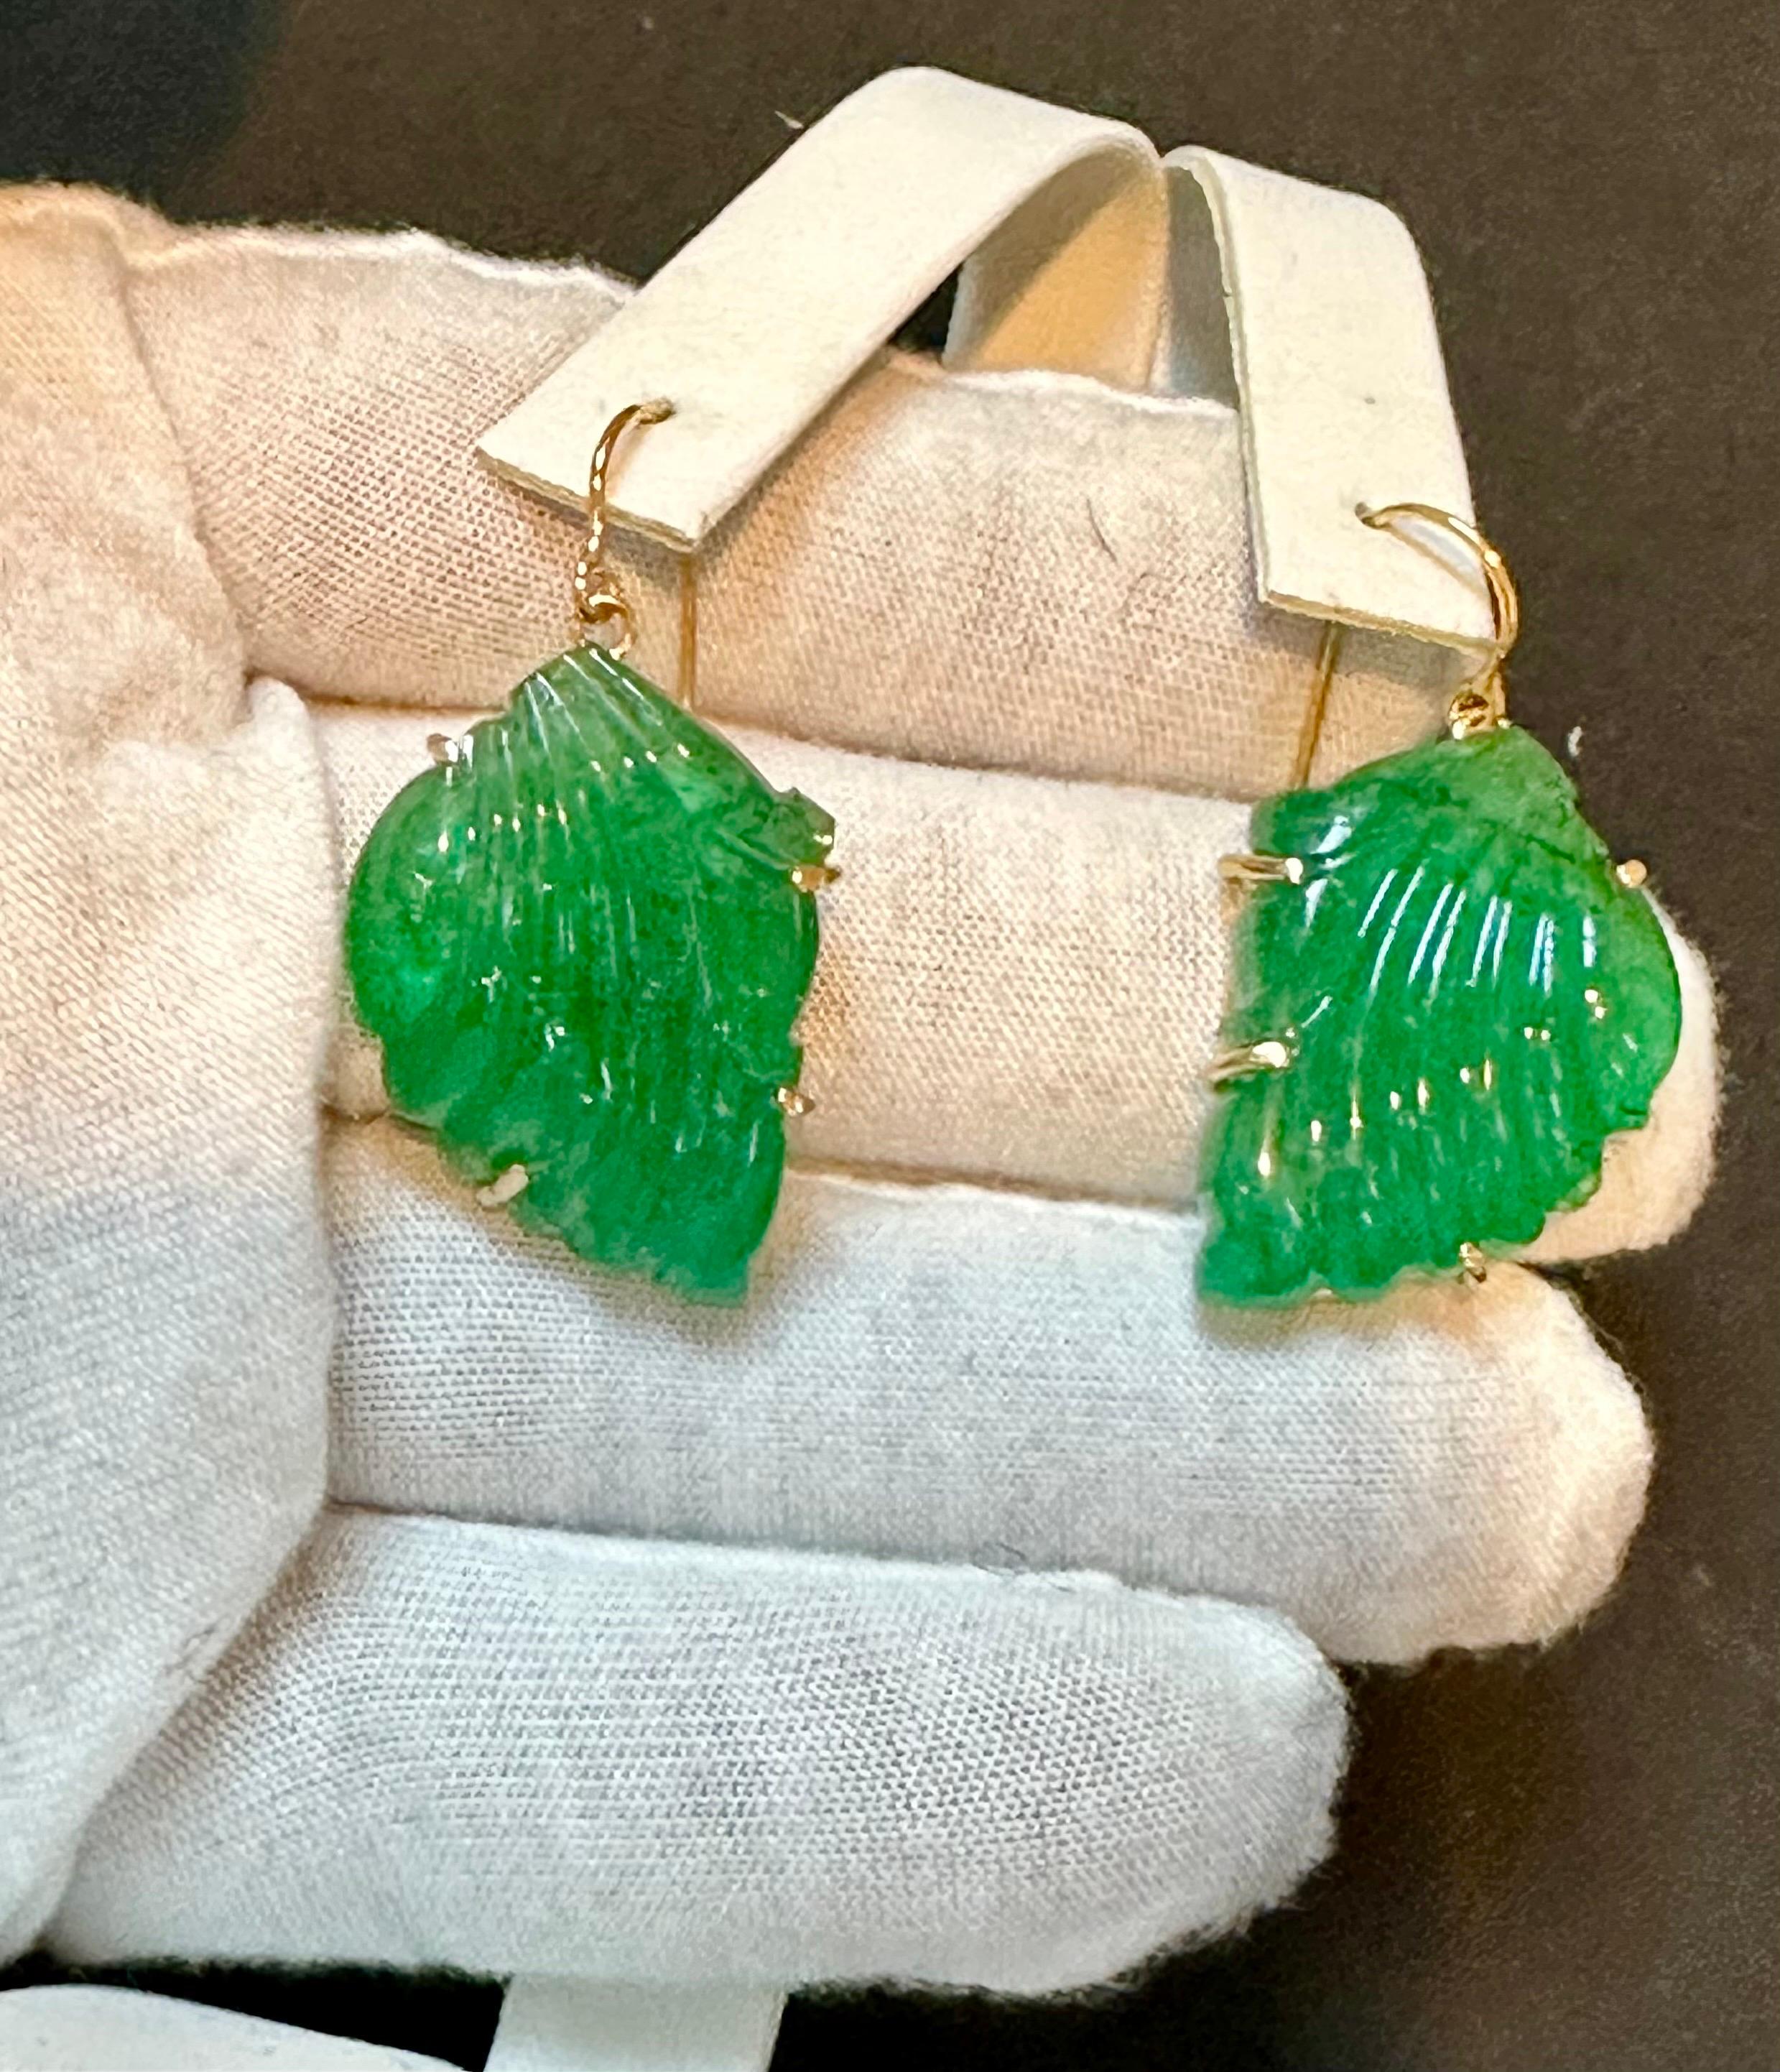 55 Ct Carved Emerald Leaf Shape Earrings 14 Kt Yellow Gold French Wire Earring For Sale 2